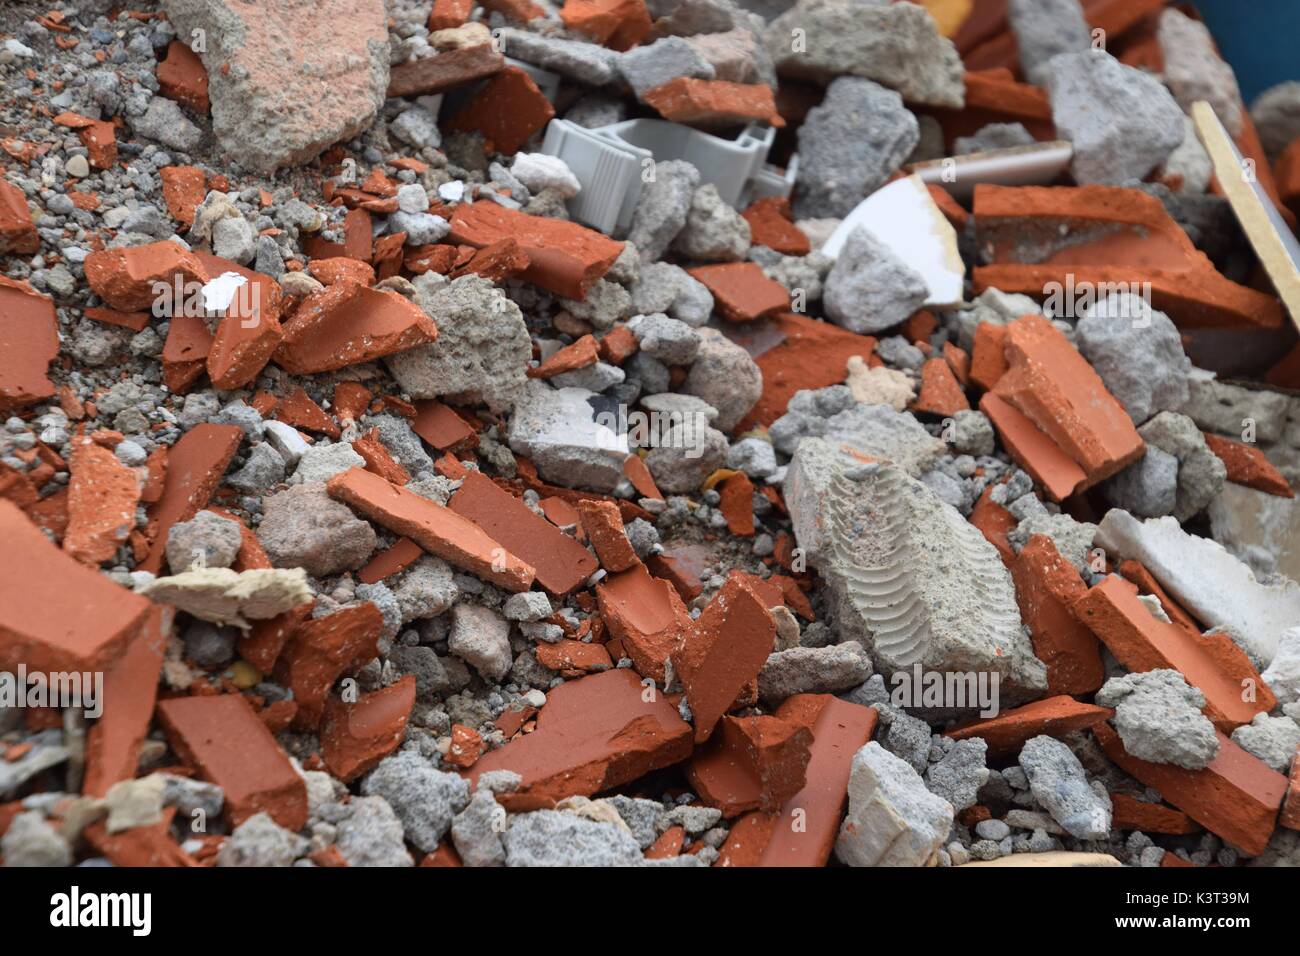 constructions waste consists of unwanted material produced dirctly or incidentally by the construction of industries, includes building materials Stock Photo